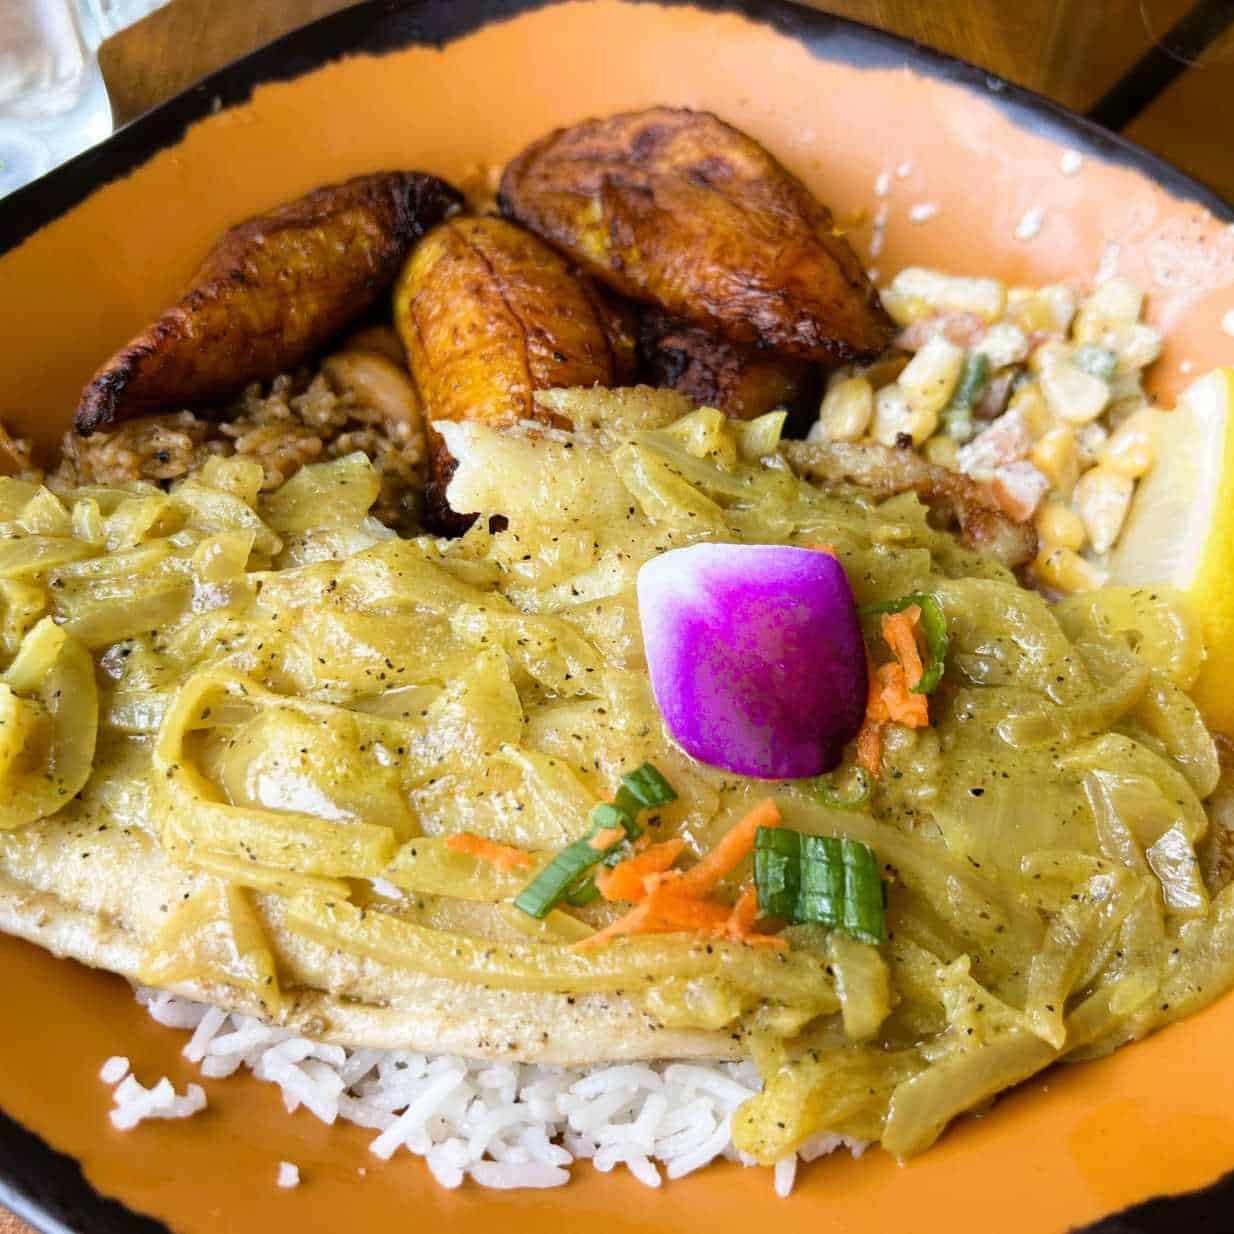 Samaki, a pan flash-fried fish topped with tangy sautéed onions. A fresh corn salad, fried plantains, stewed yellow beans, and your choice of spiced rice pilau or coconut rice accompany the fish. 